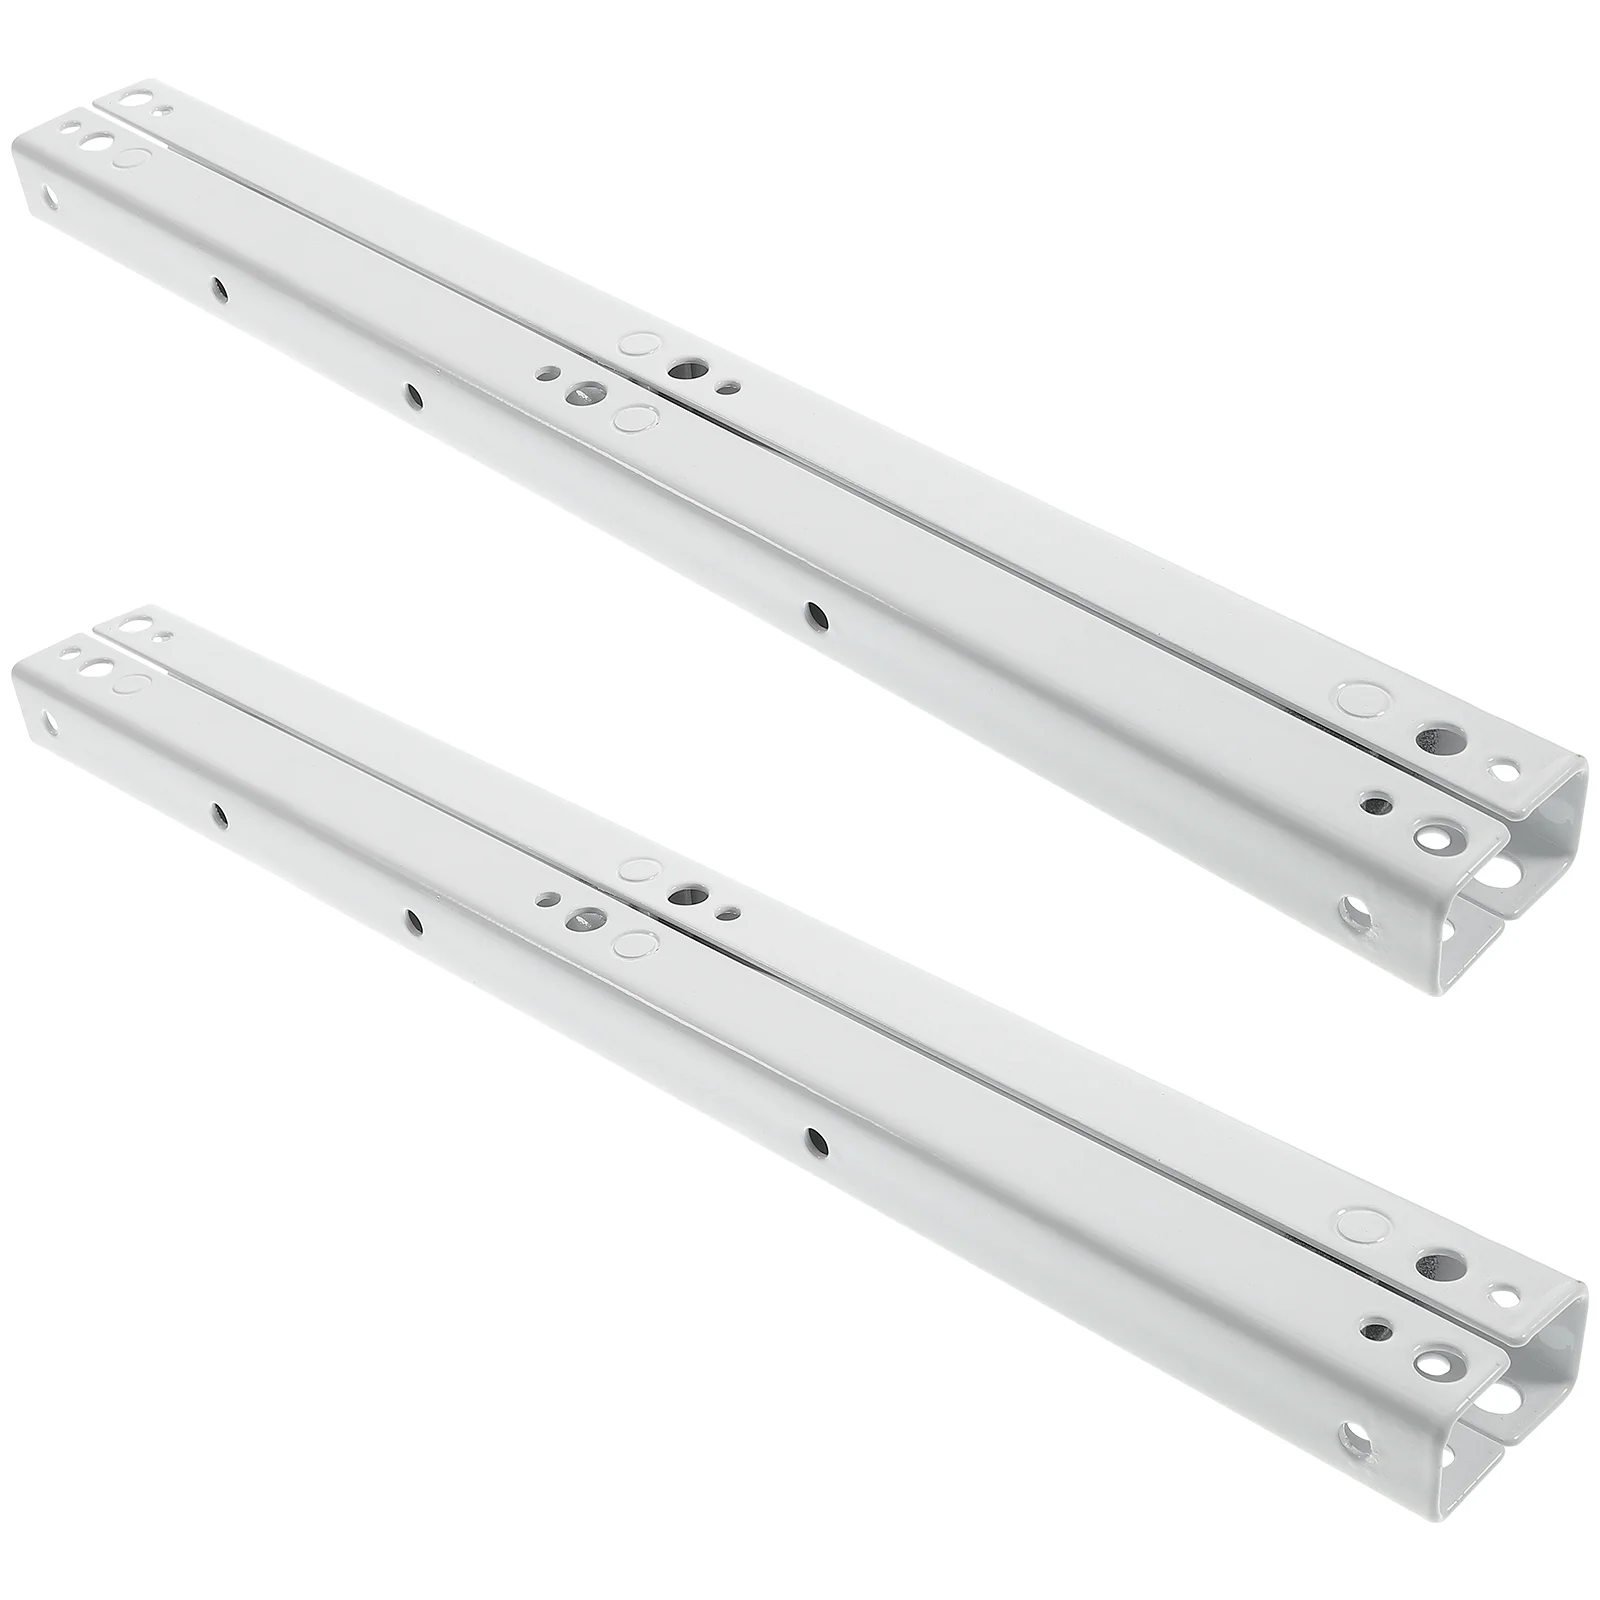 

2pcs Replacement Drop Down Hinge Drop Leaf Support Lift And Up Hinges Trap Door Hinges Locking Hinge